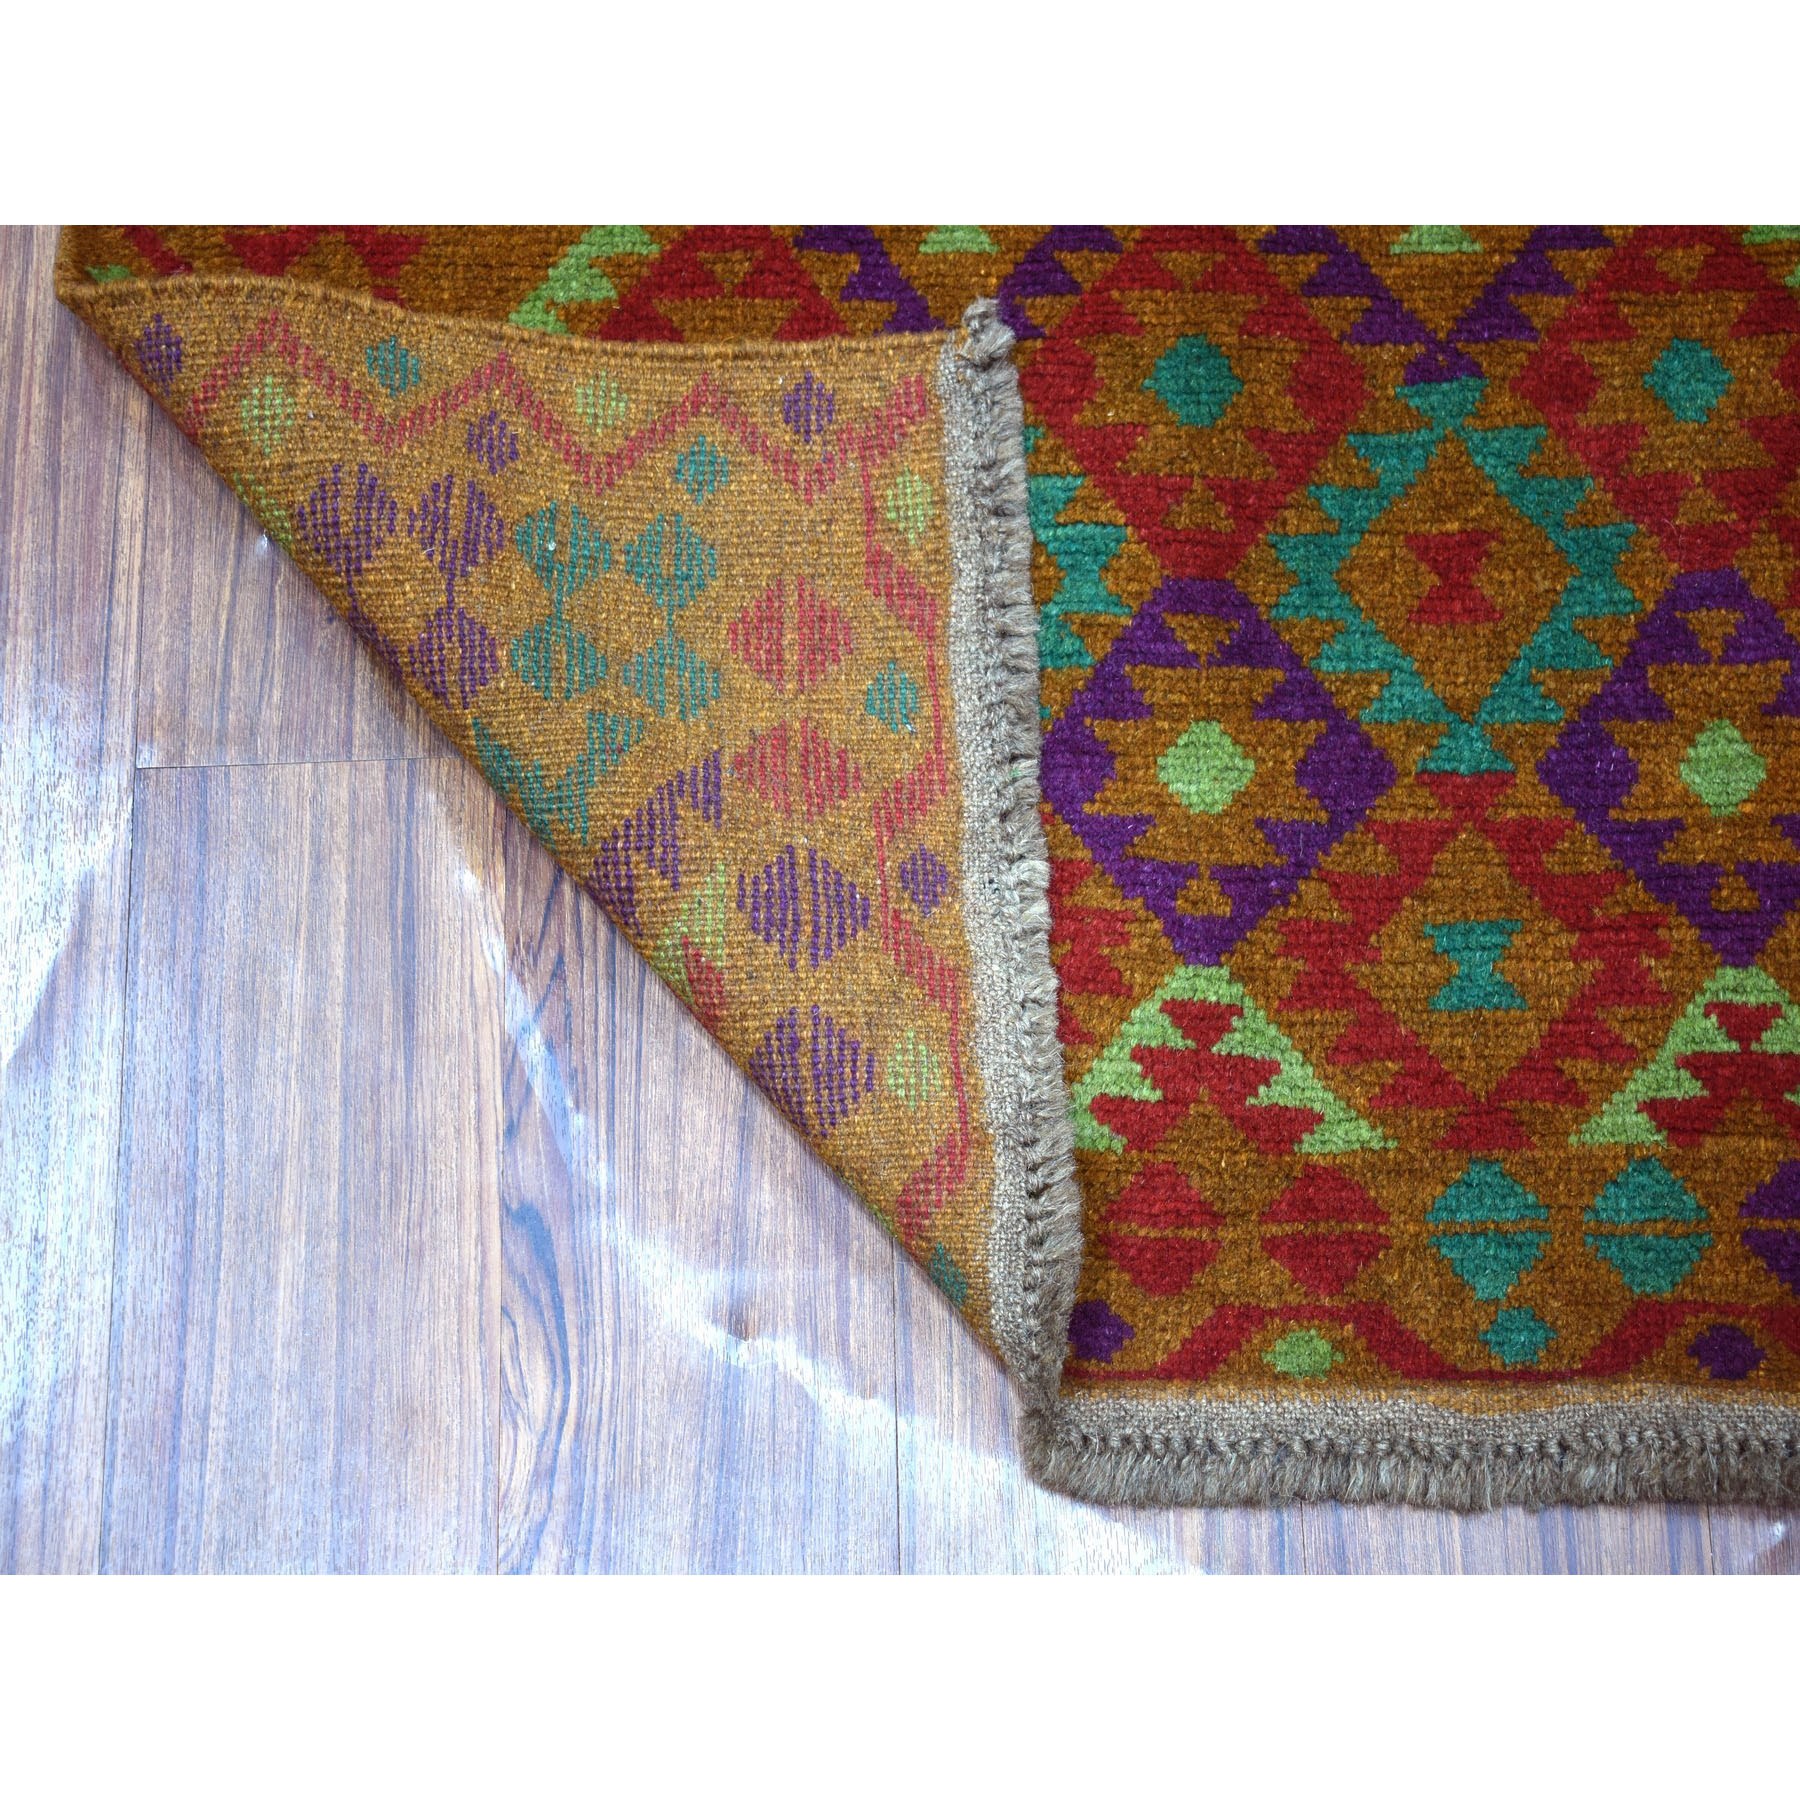 3'1"x4'9" Brown Colorful Afghan Baluch Geometric Design Hand Woven Pure Wool Oriental Rug 